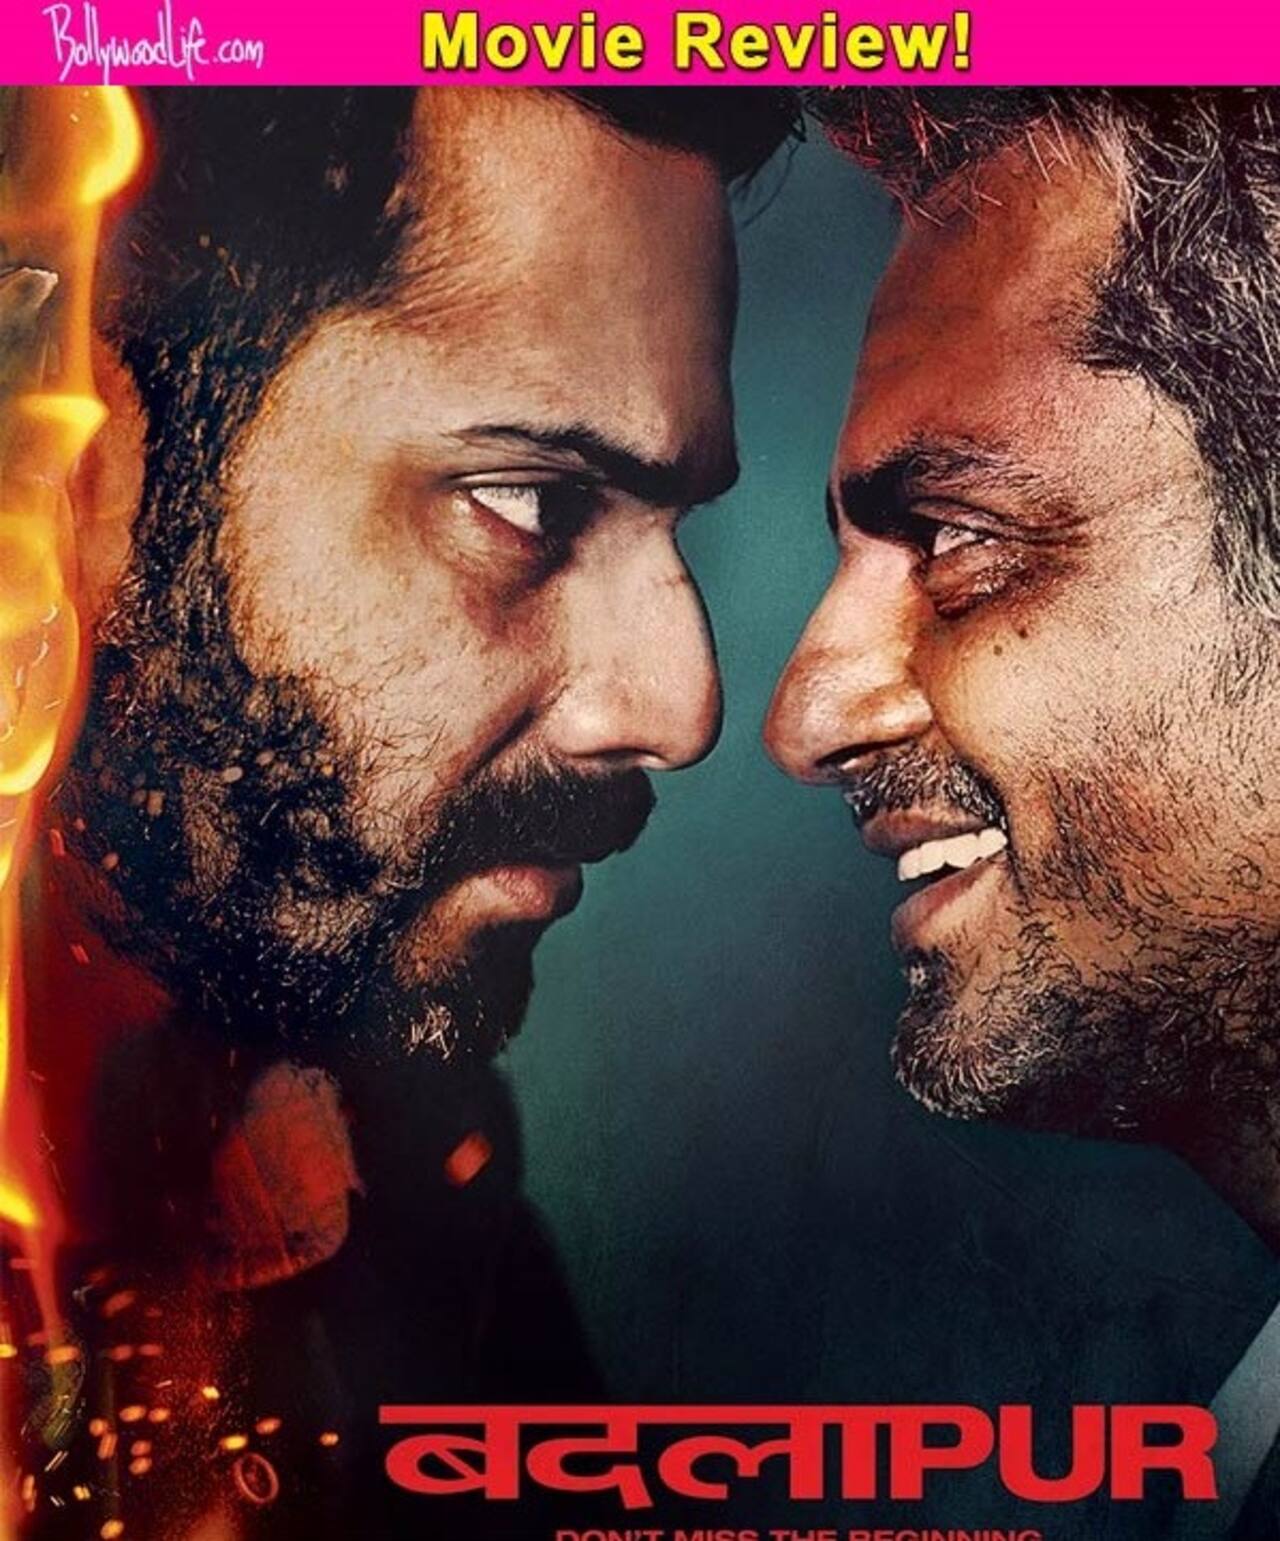 Badlapur movie review: Nawazuddin Siddiqui steals the thunder from Varun Dhawan’s angry young man avatar!